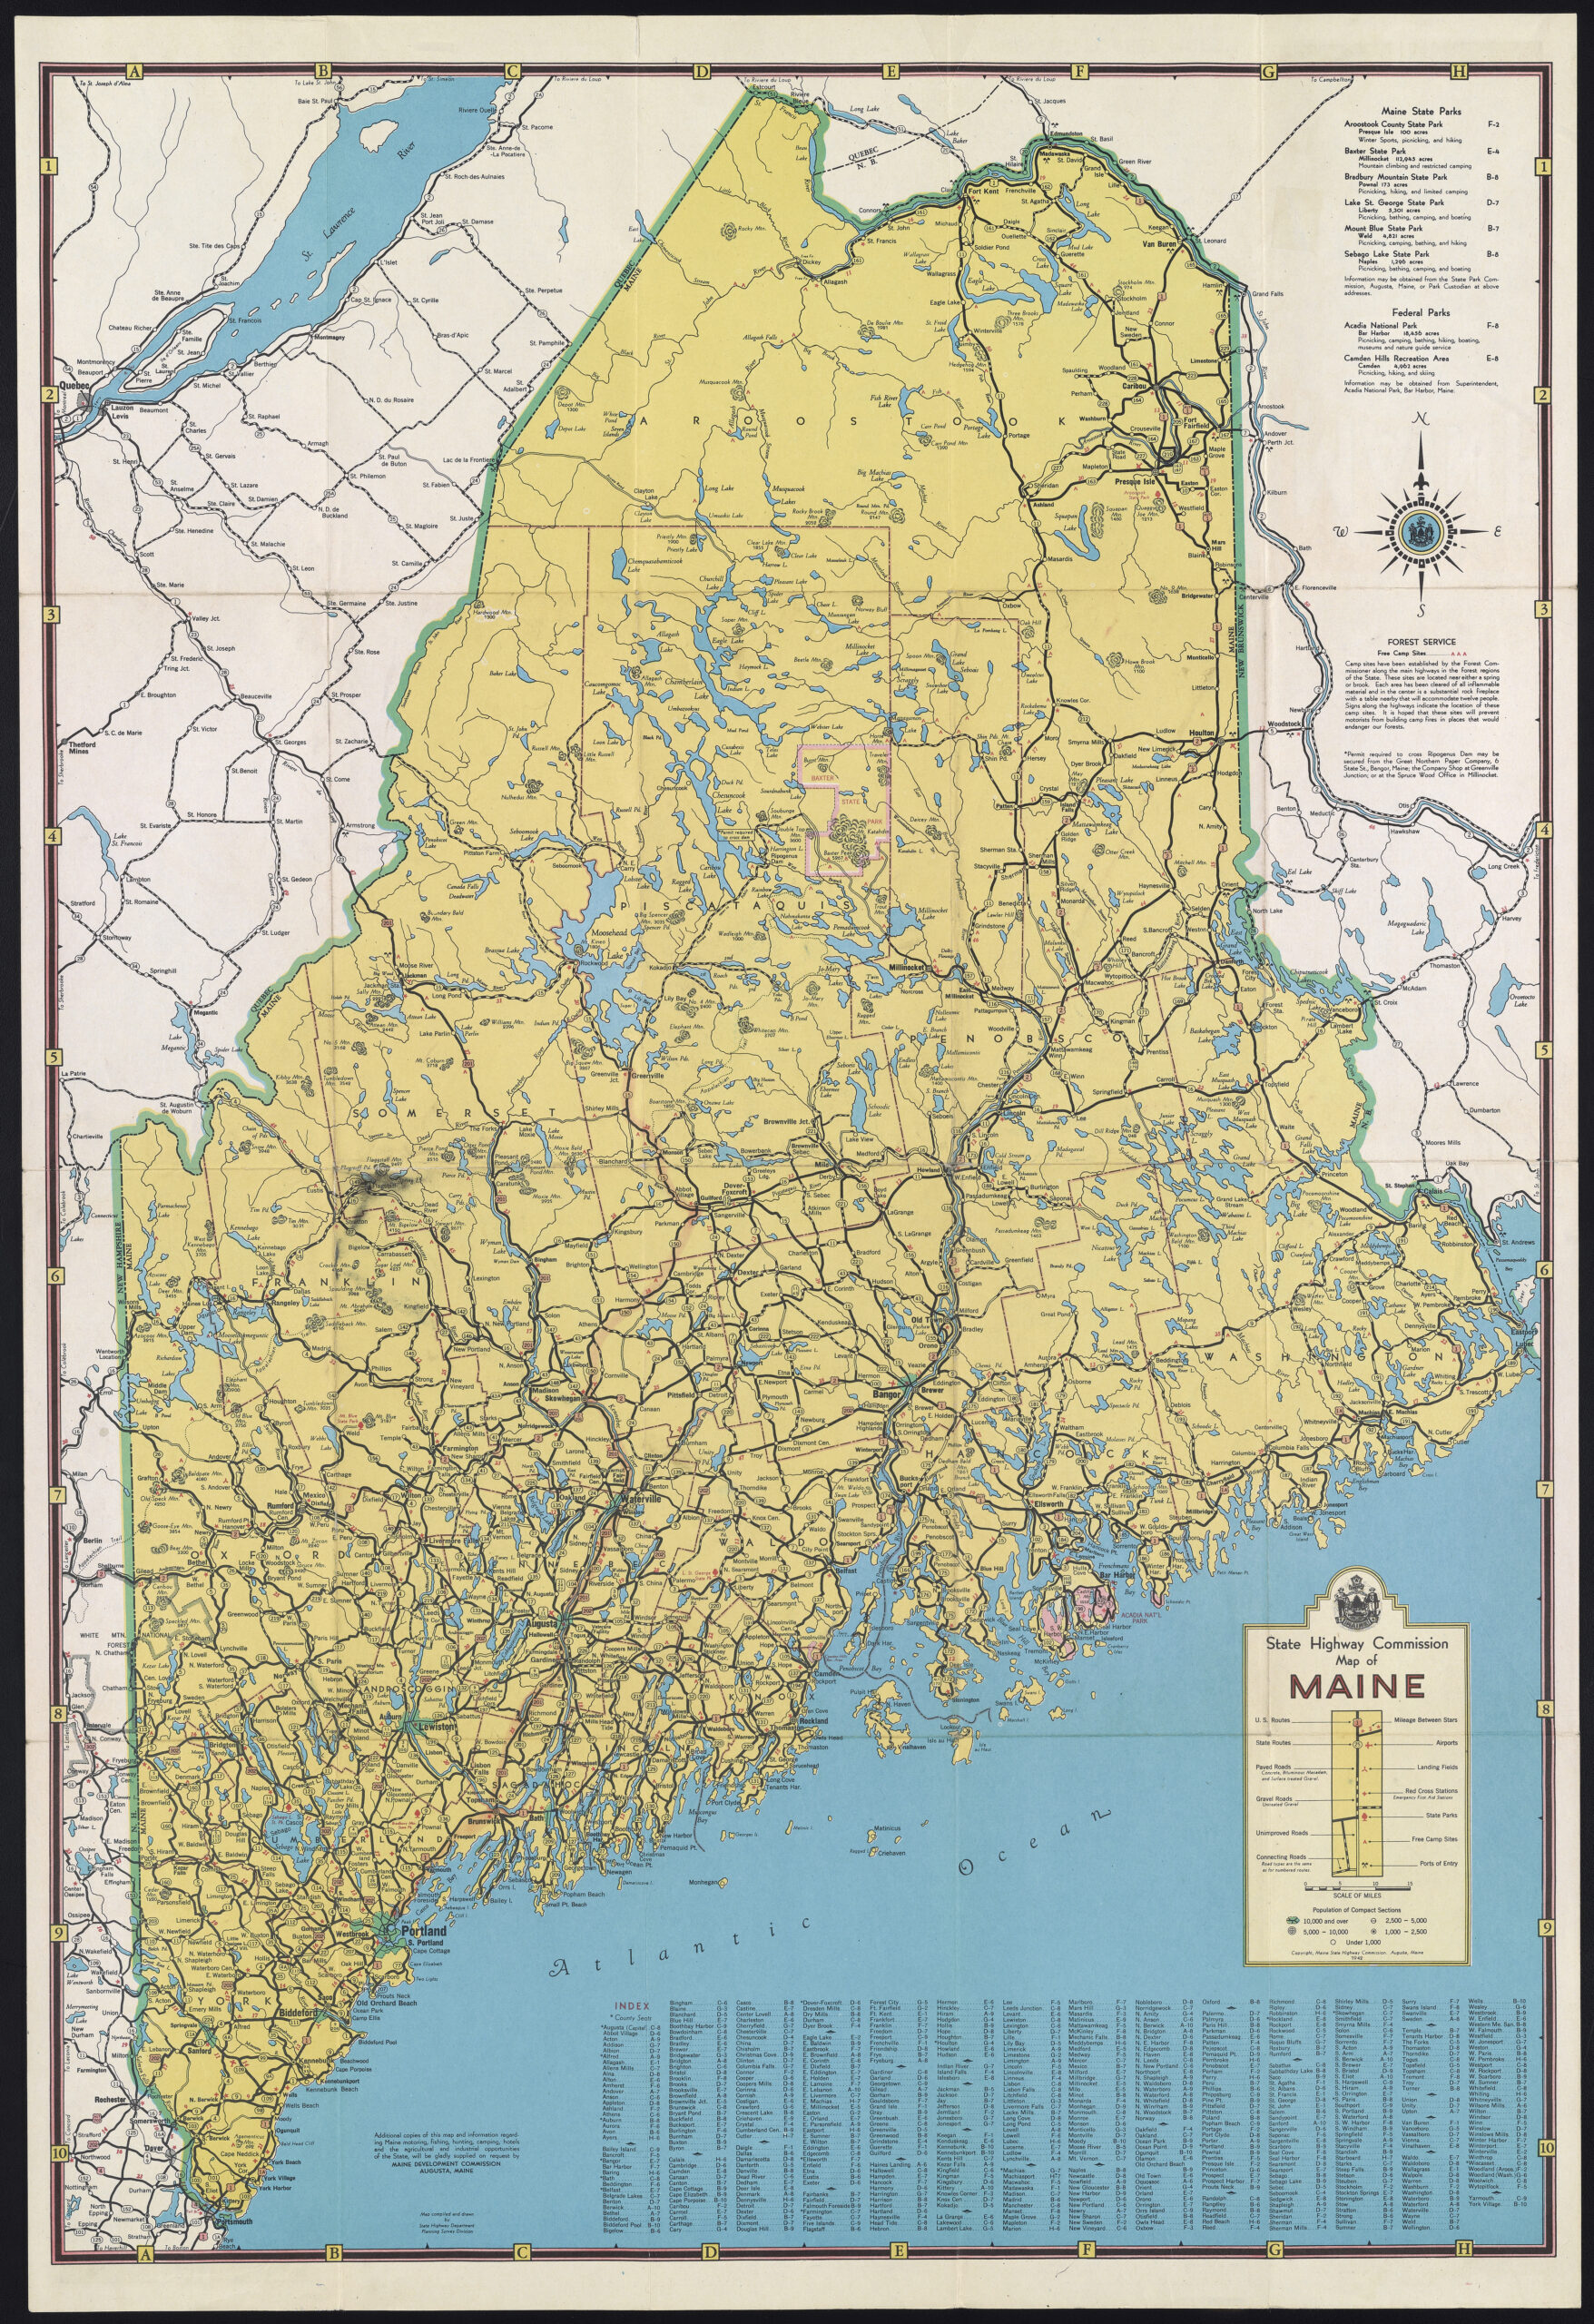 1946 Map of Maine by State Highway Commission